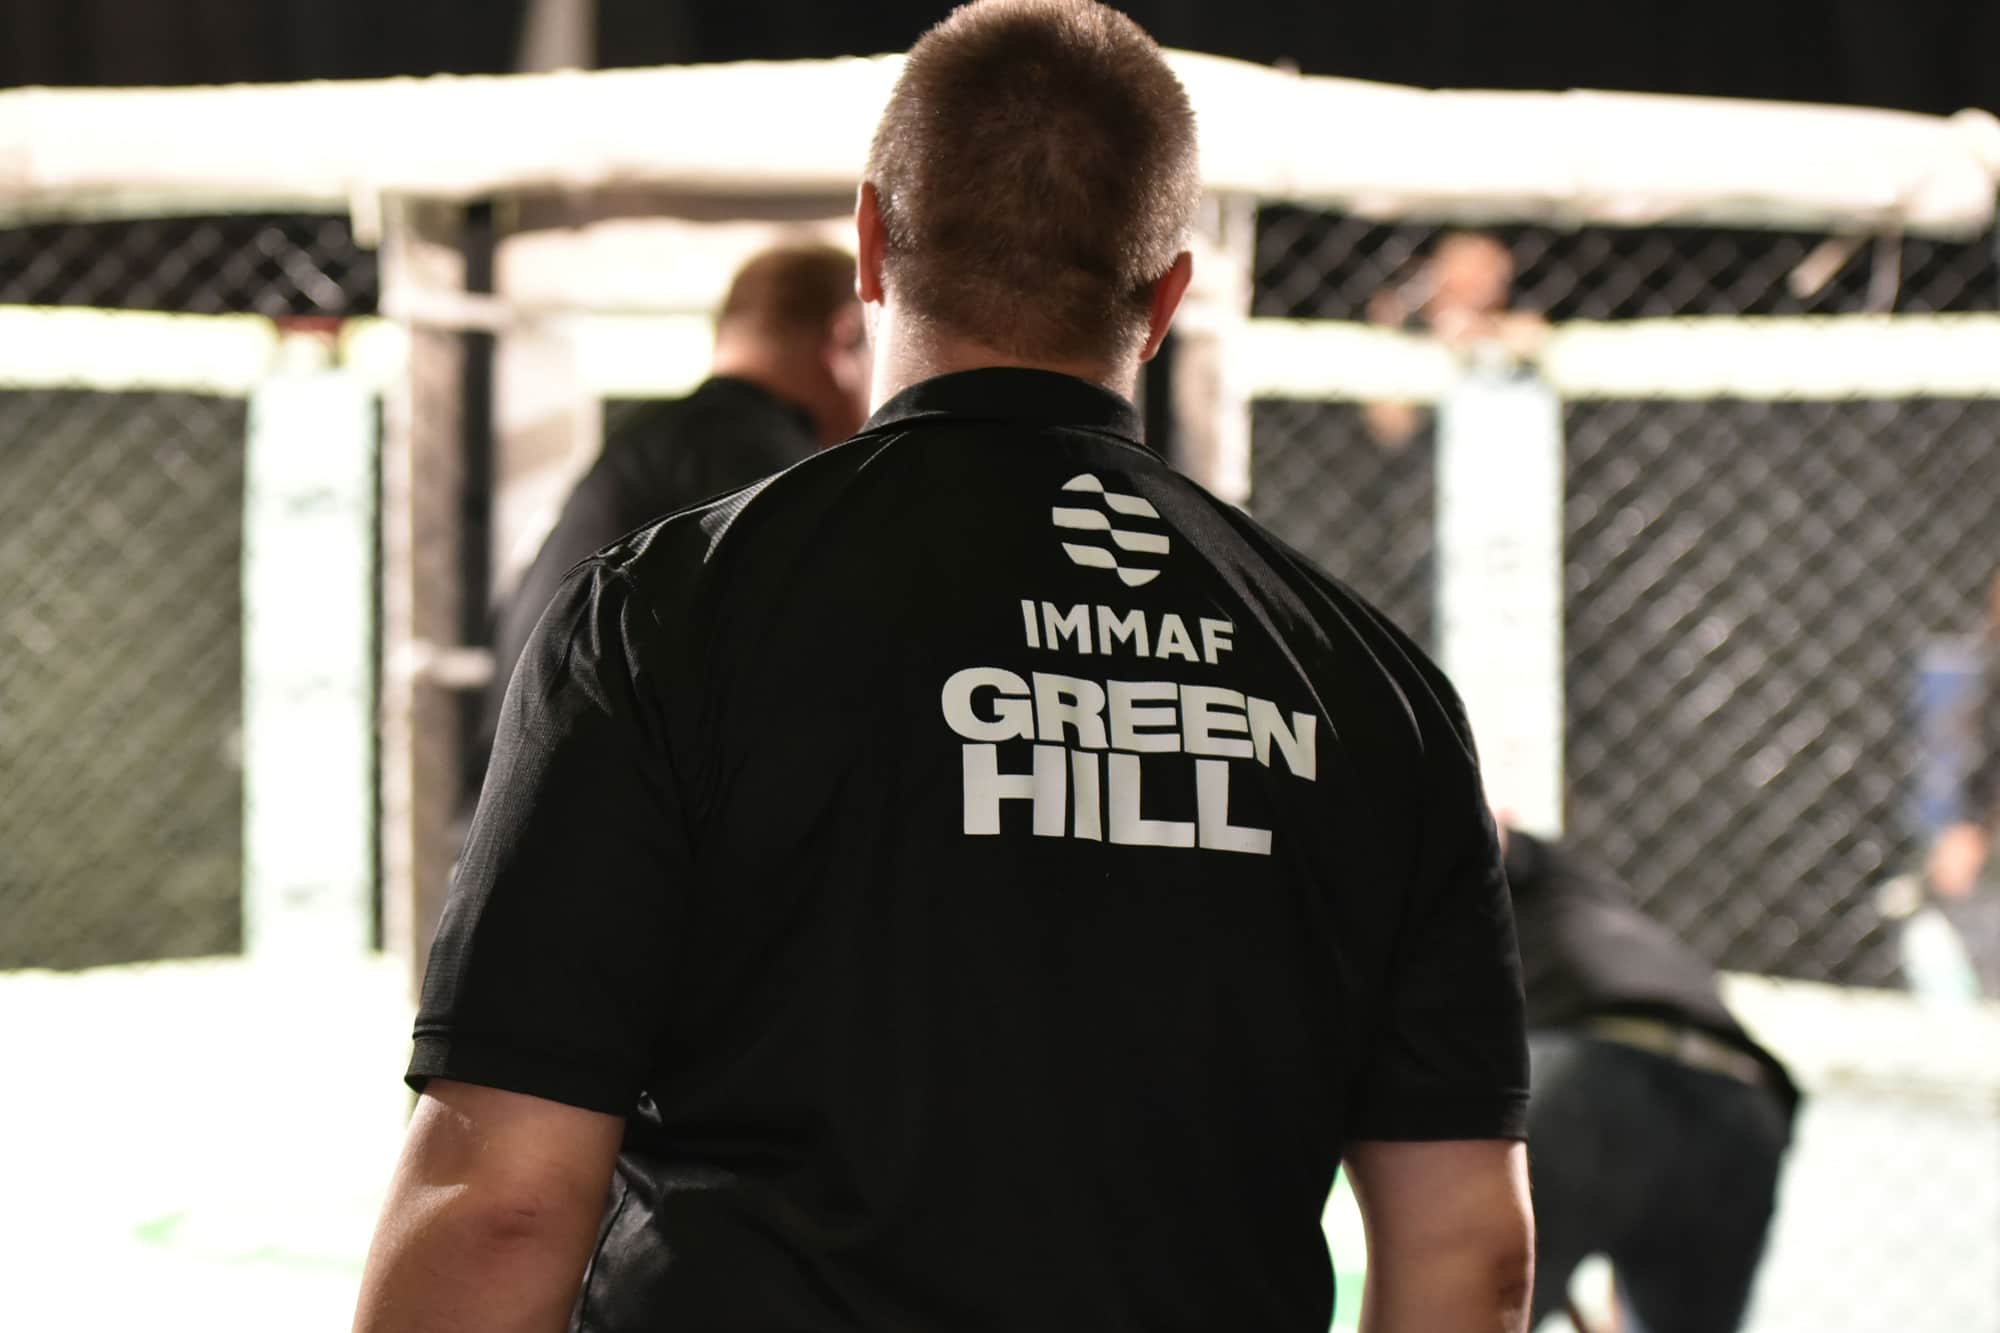 German MMA Federation builds UFC relationship, reports